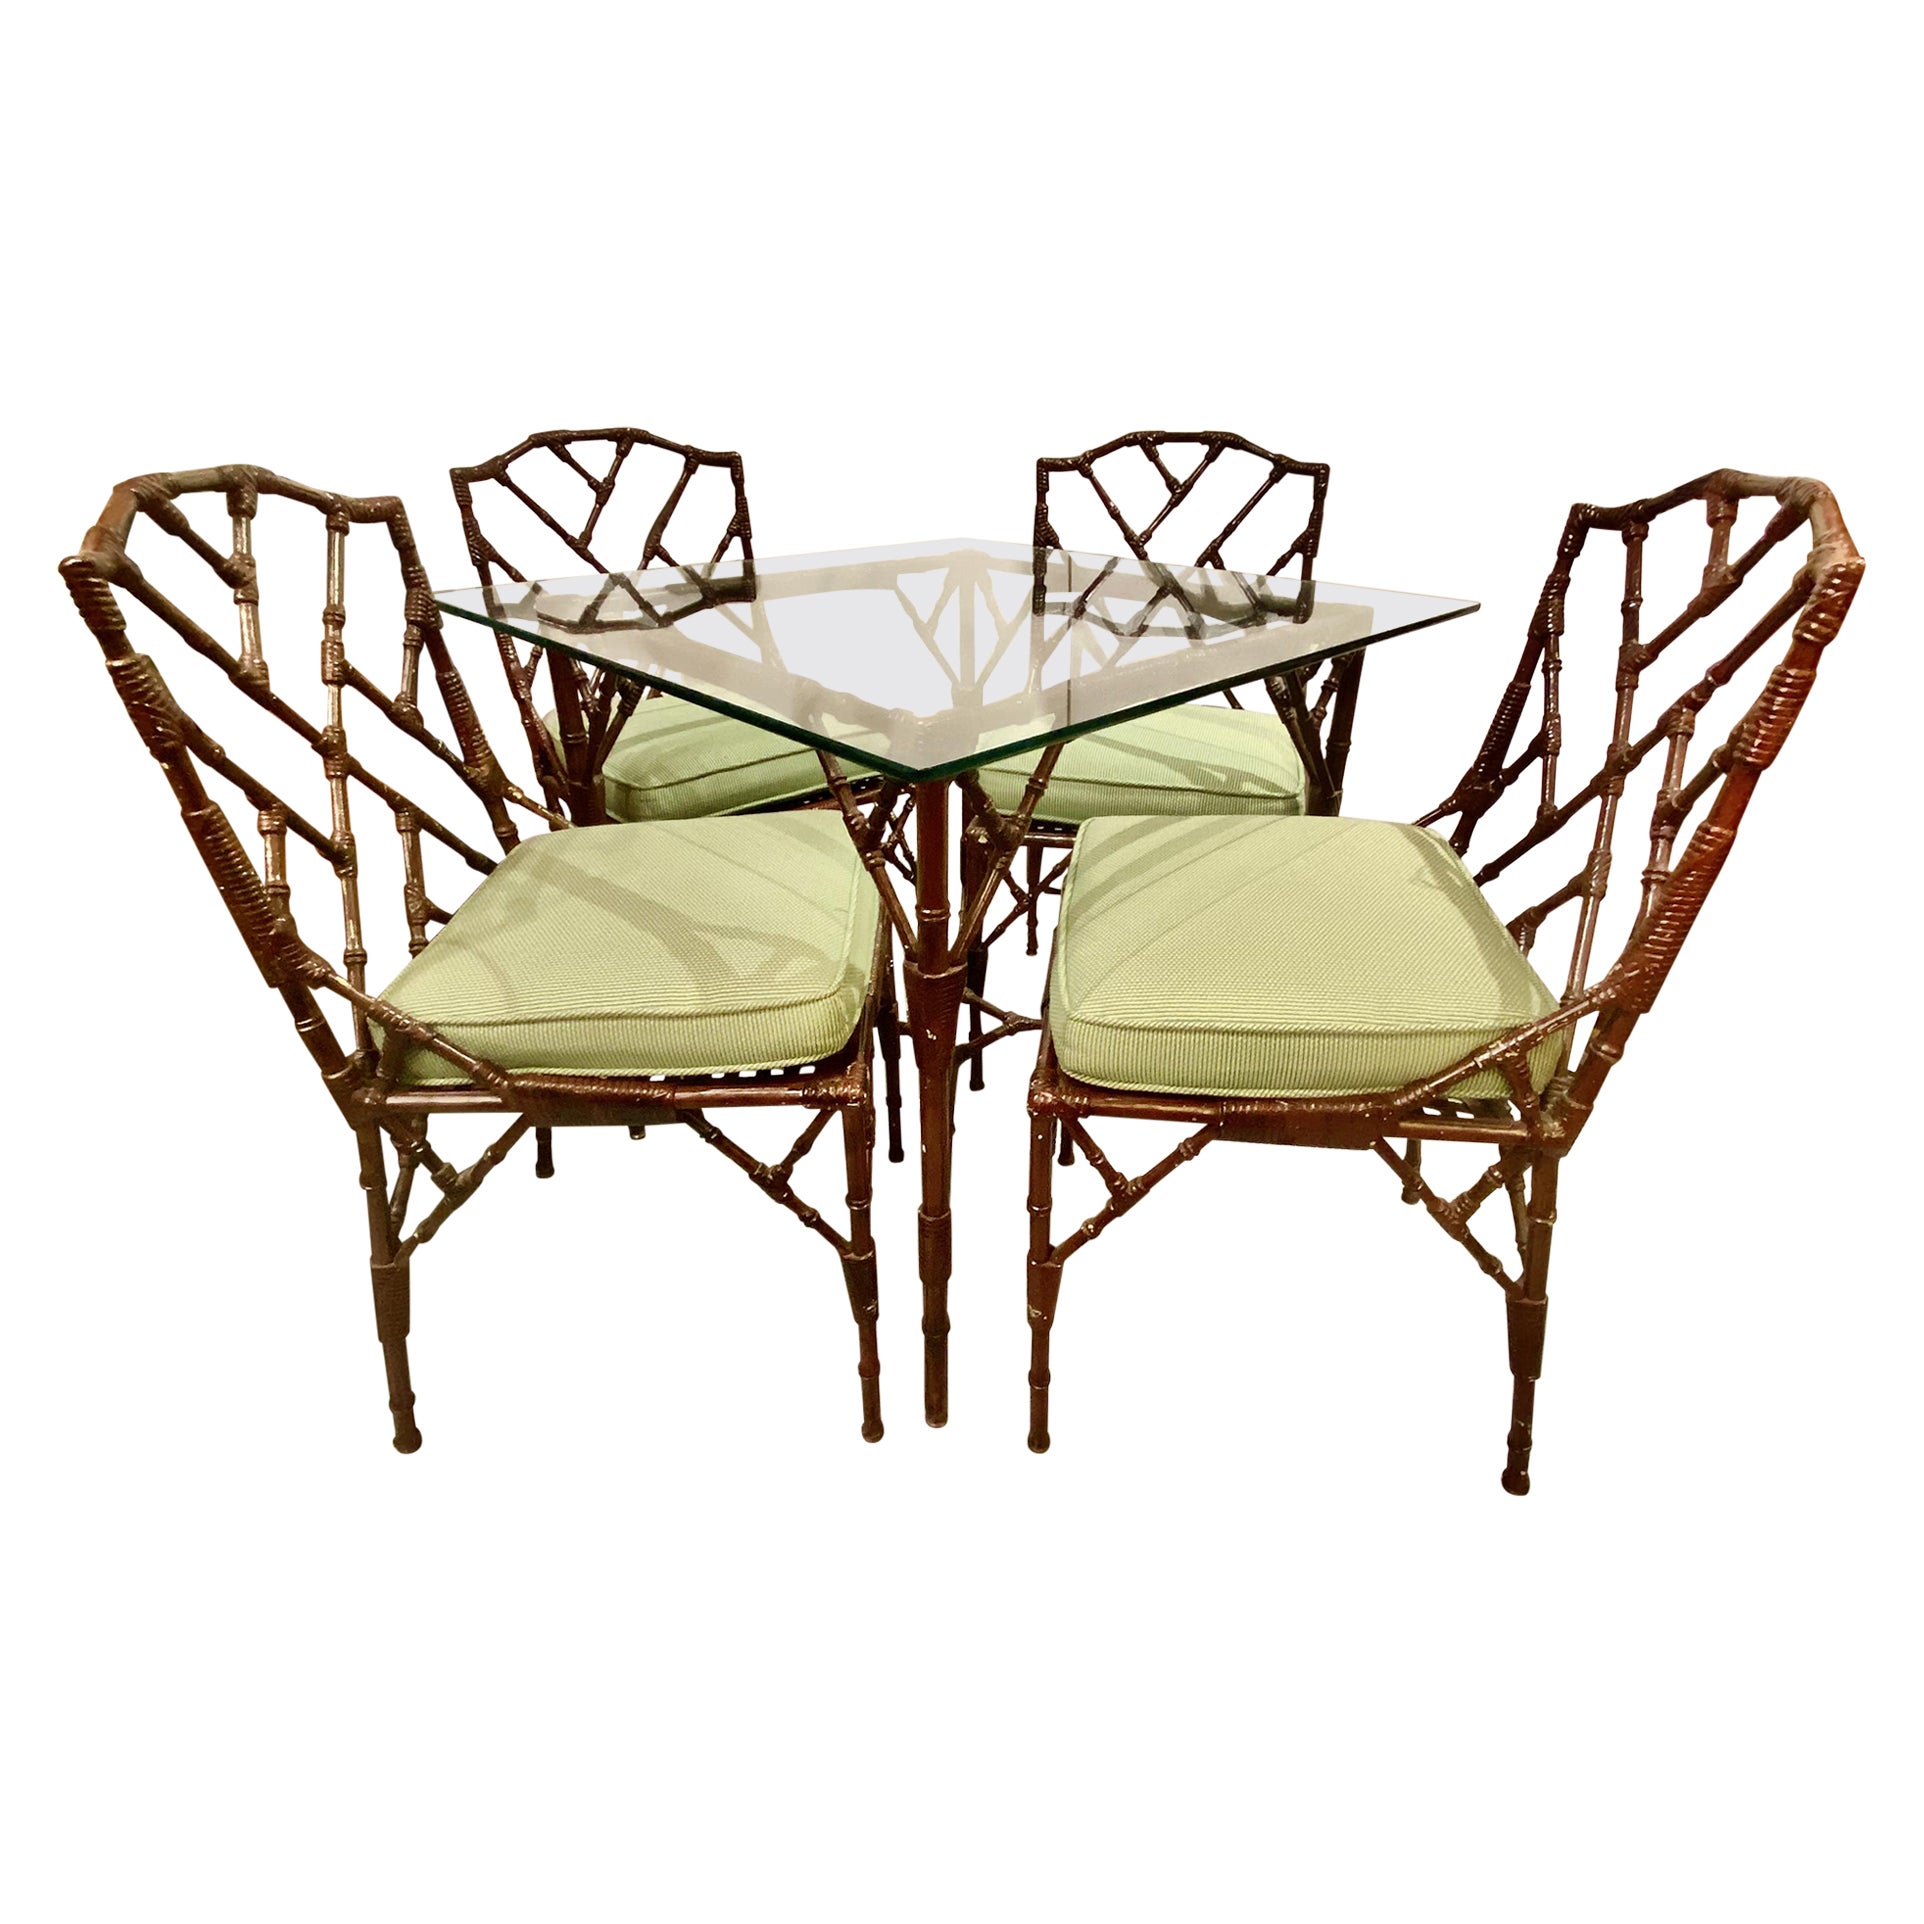 Set of Four Faux Bamboo Chairs and Table, c. 1970-1980 For Sale